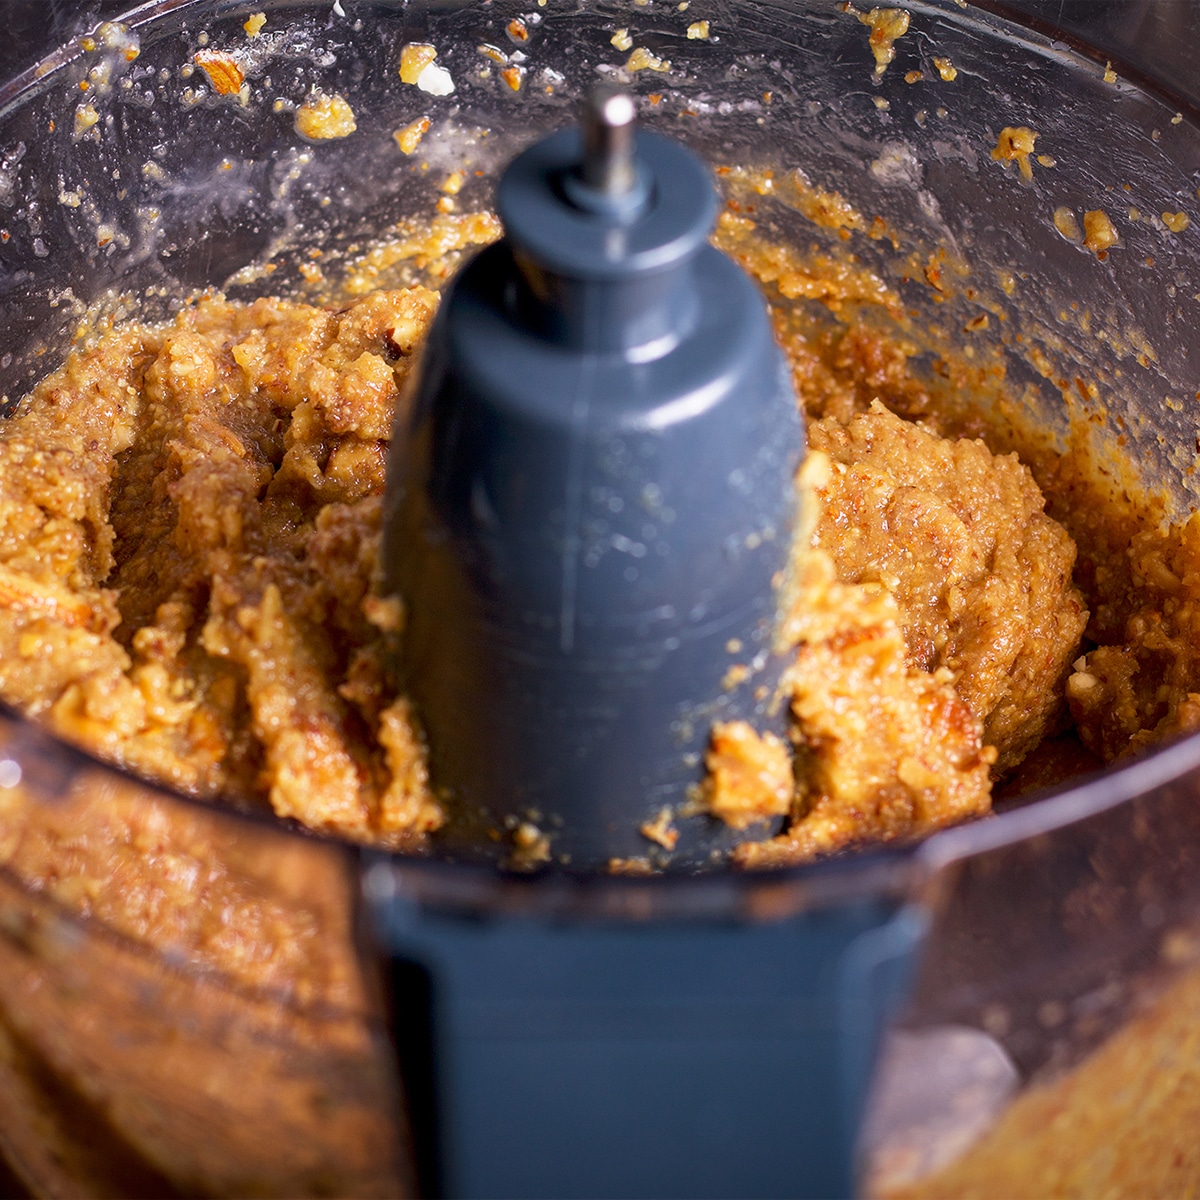 A food processor that contains all the ingredients to make frangipane.